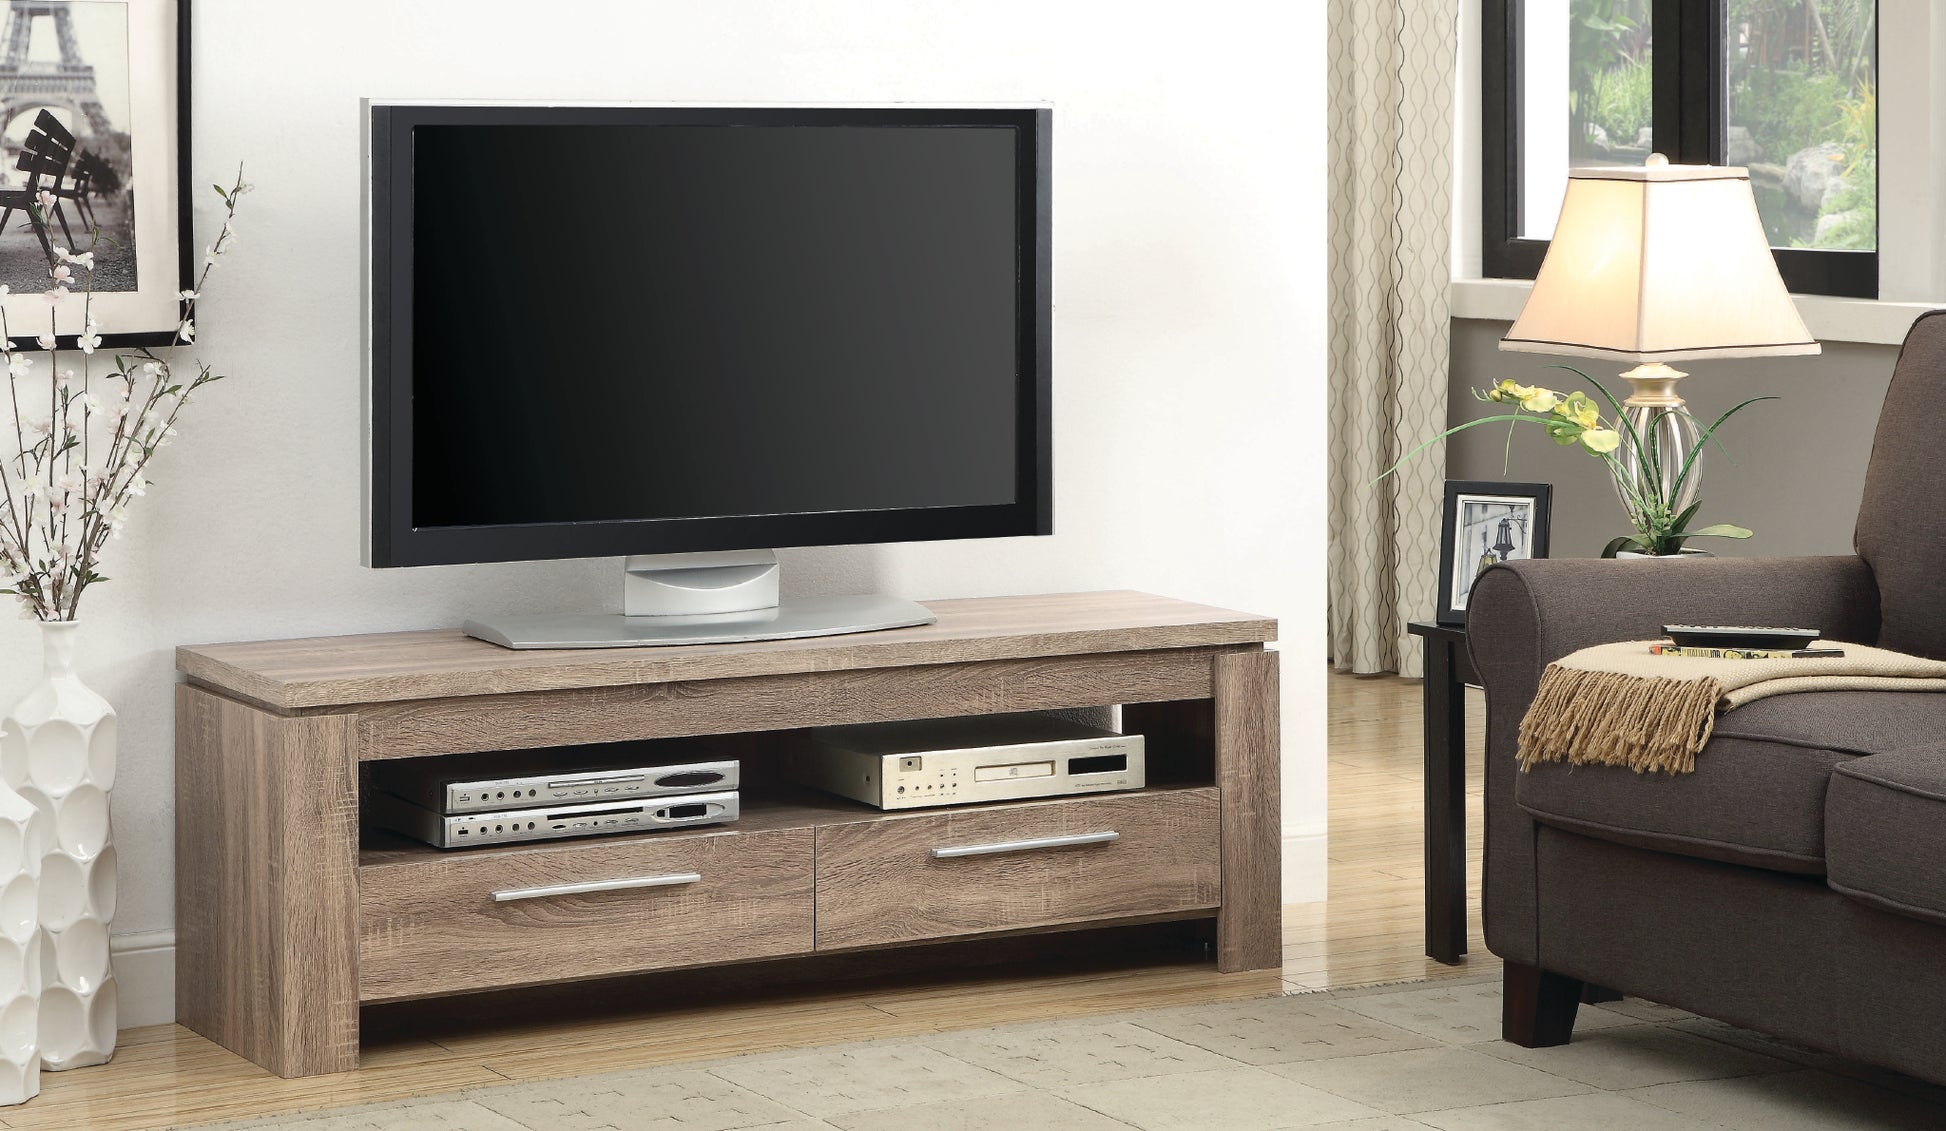 TV6148 - TV Stand Weathered Brown